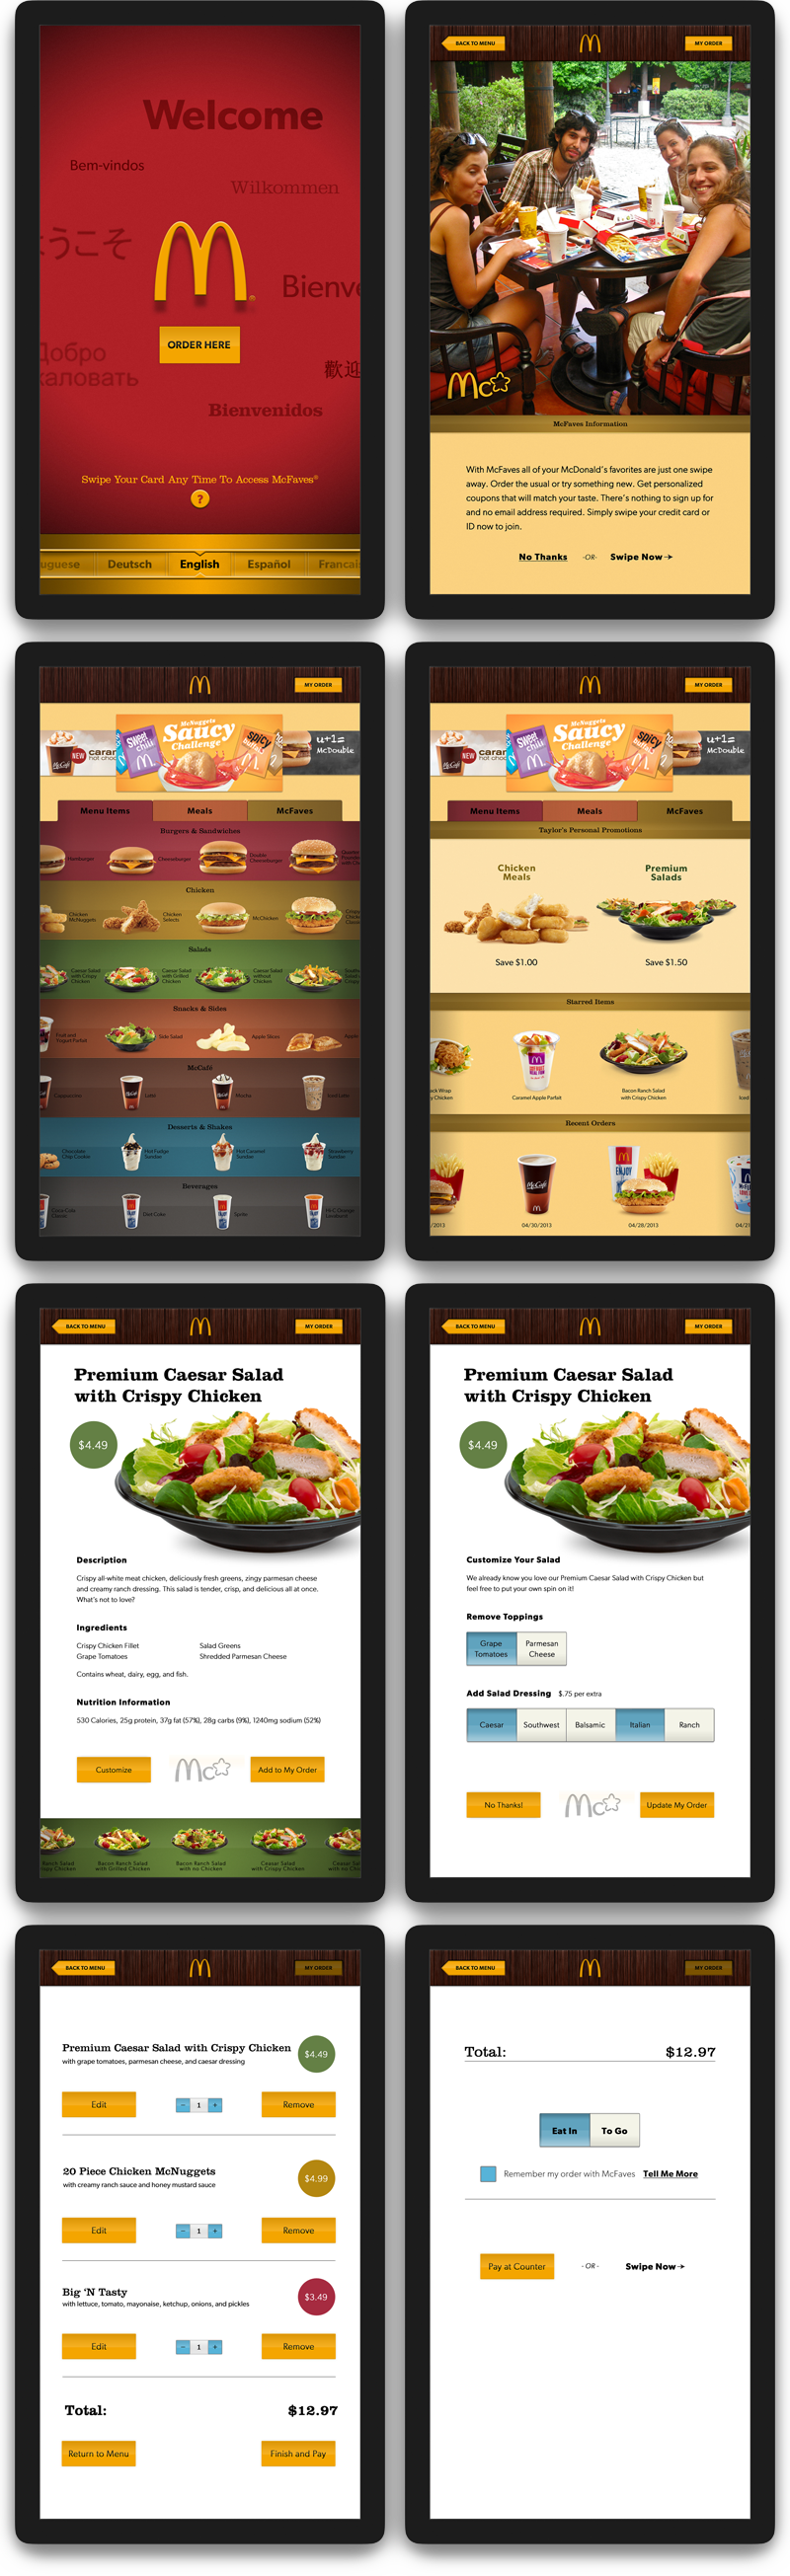 McDonald’s menu boards digital interactive touch screen monitor Display multitouch